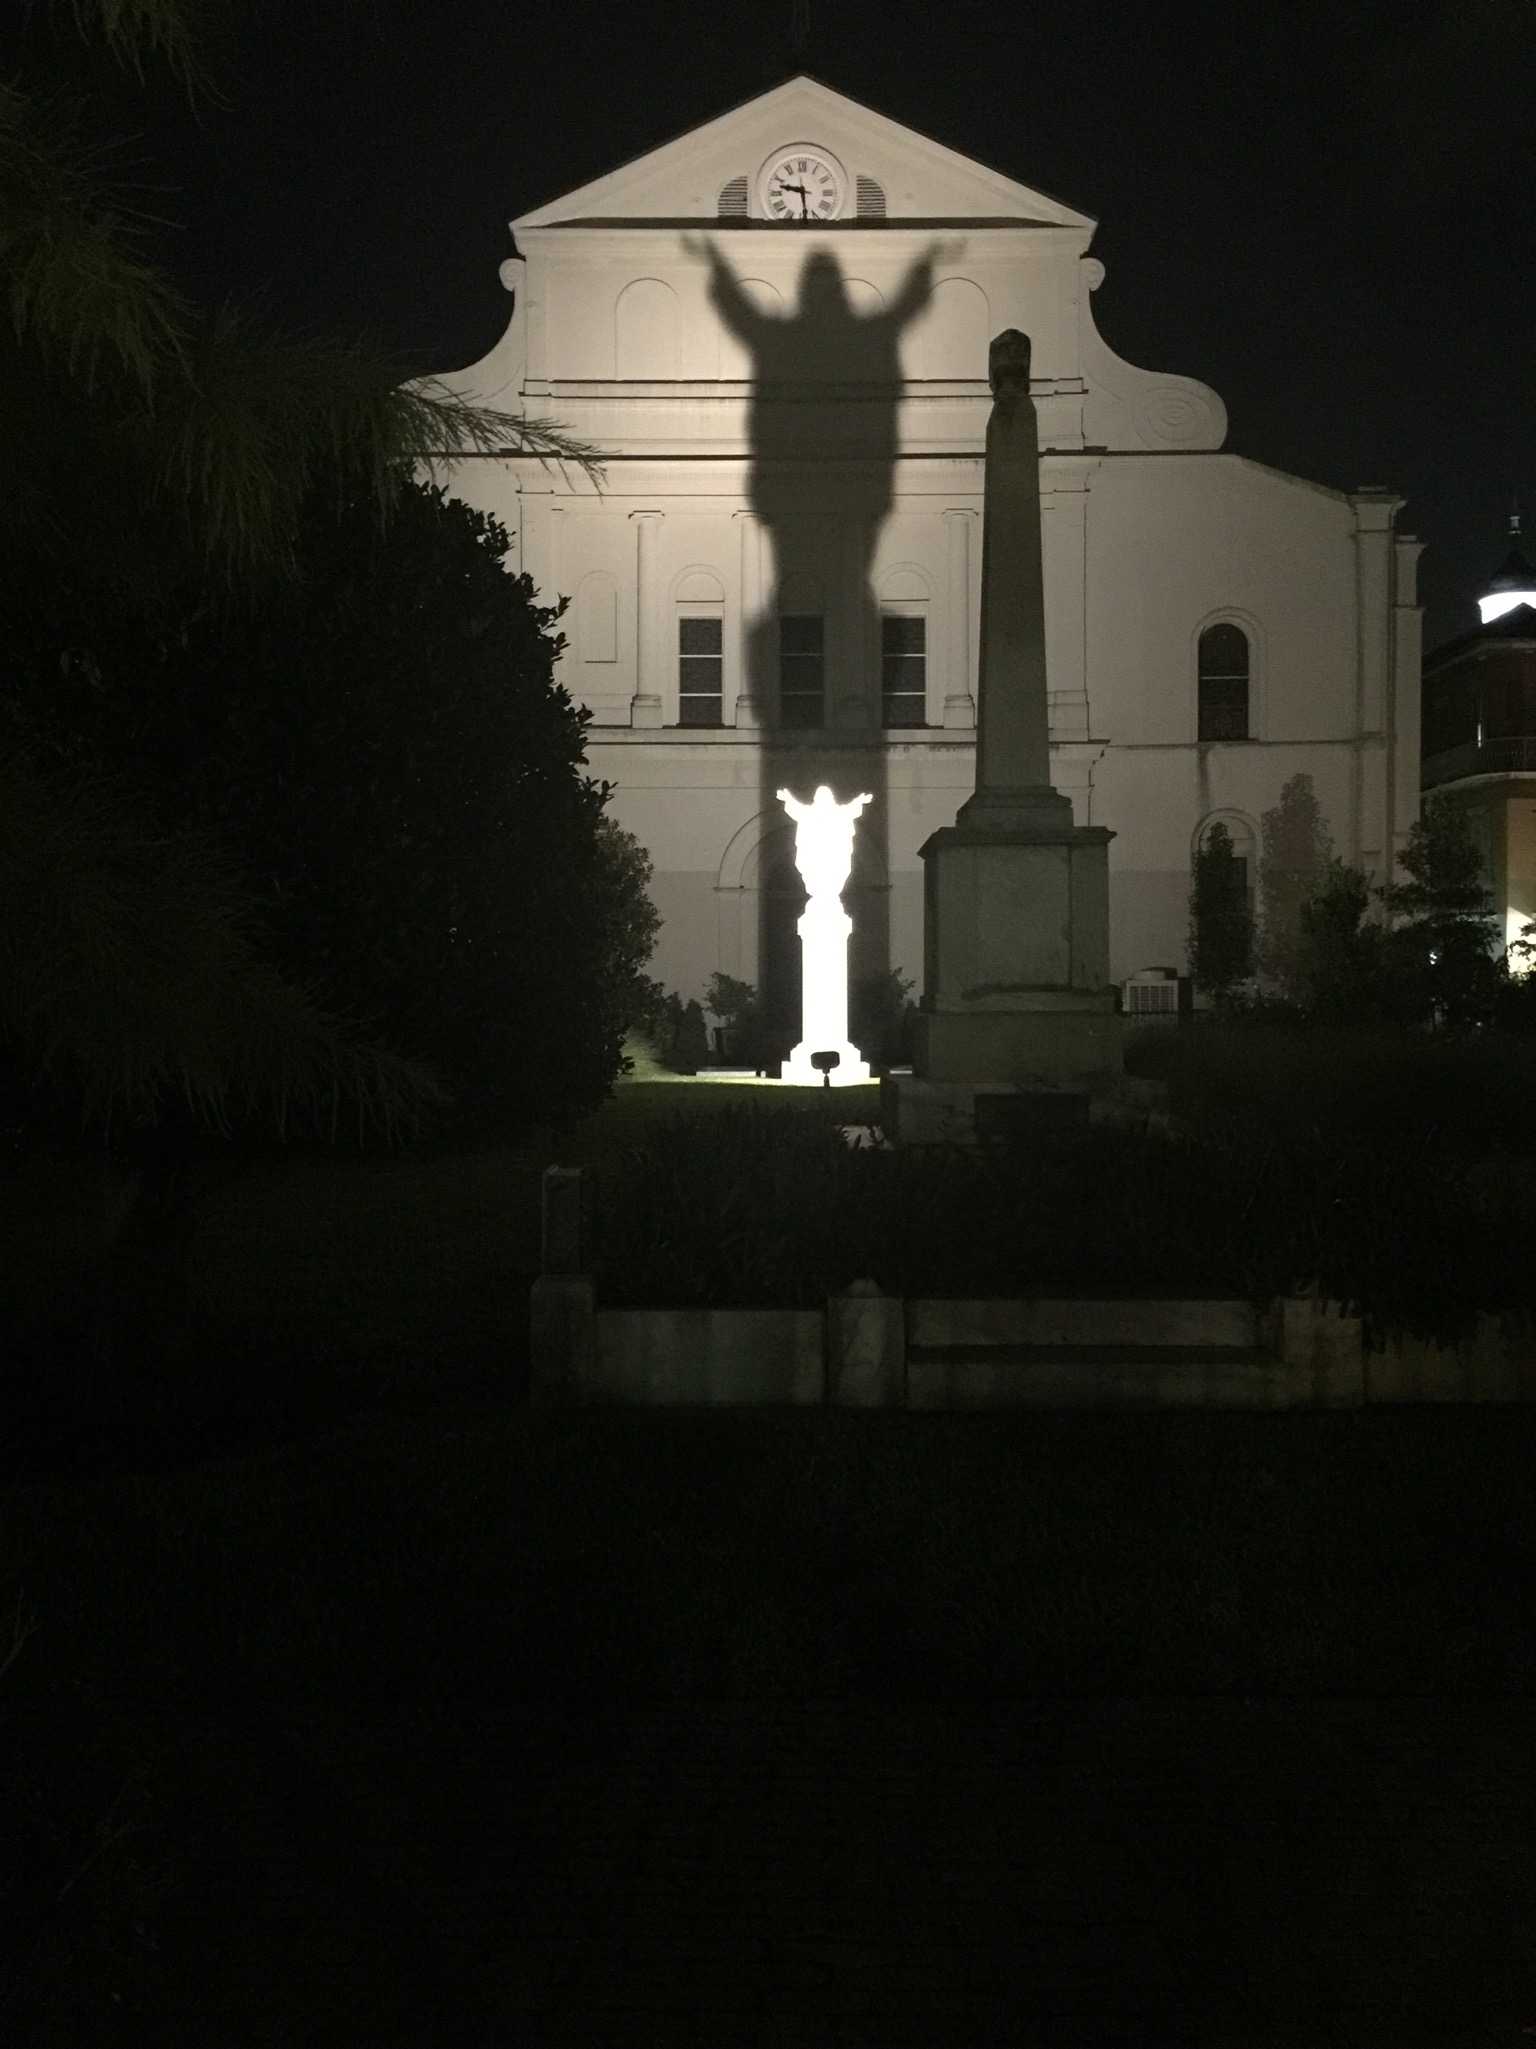 HAUNTED MYSTERIES: New Orleans' mysteries remain unanswered, but you can look for clues on one of the many haunted tours of the city. This particular statue is called Touchdown Jesus, because it looks like a referee calling a touchdown.